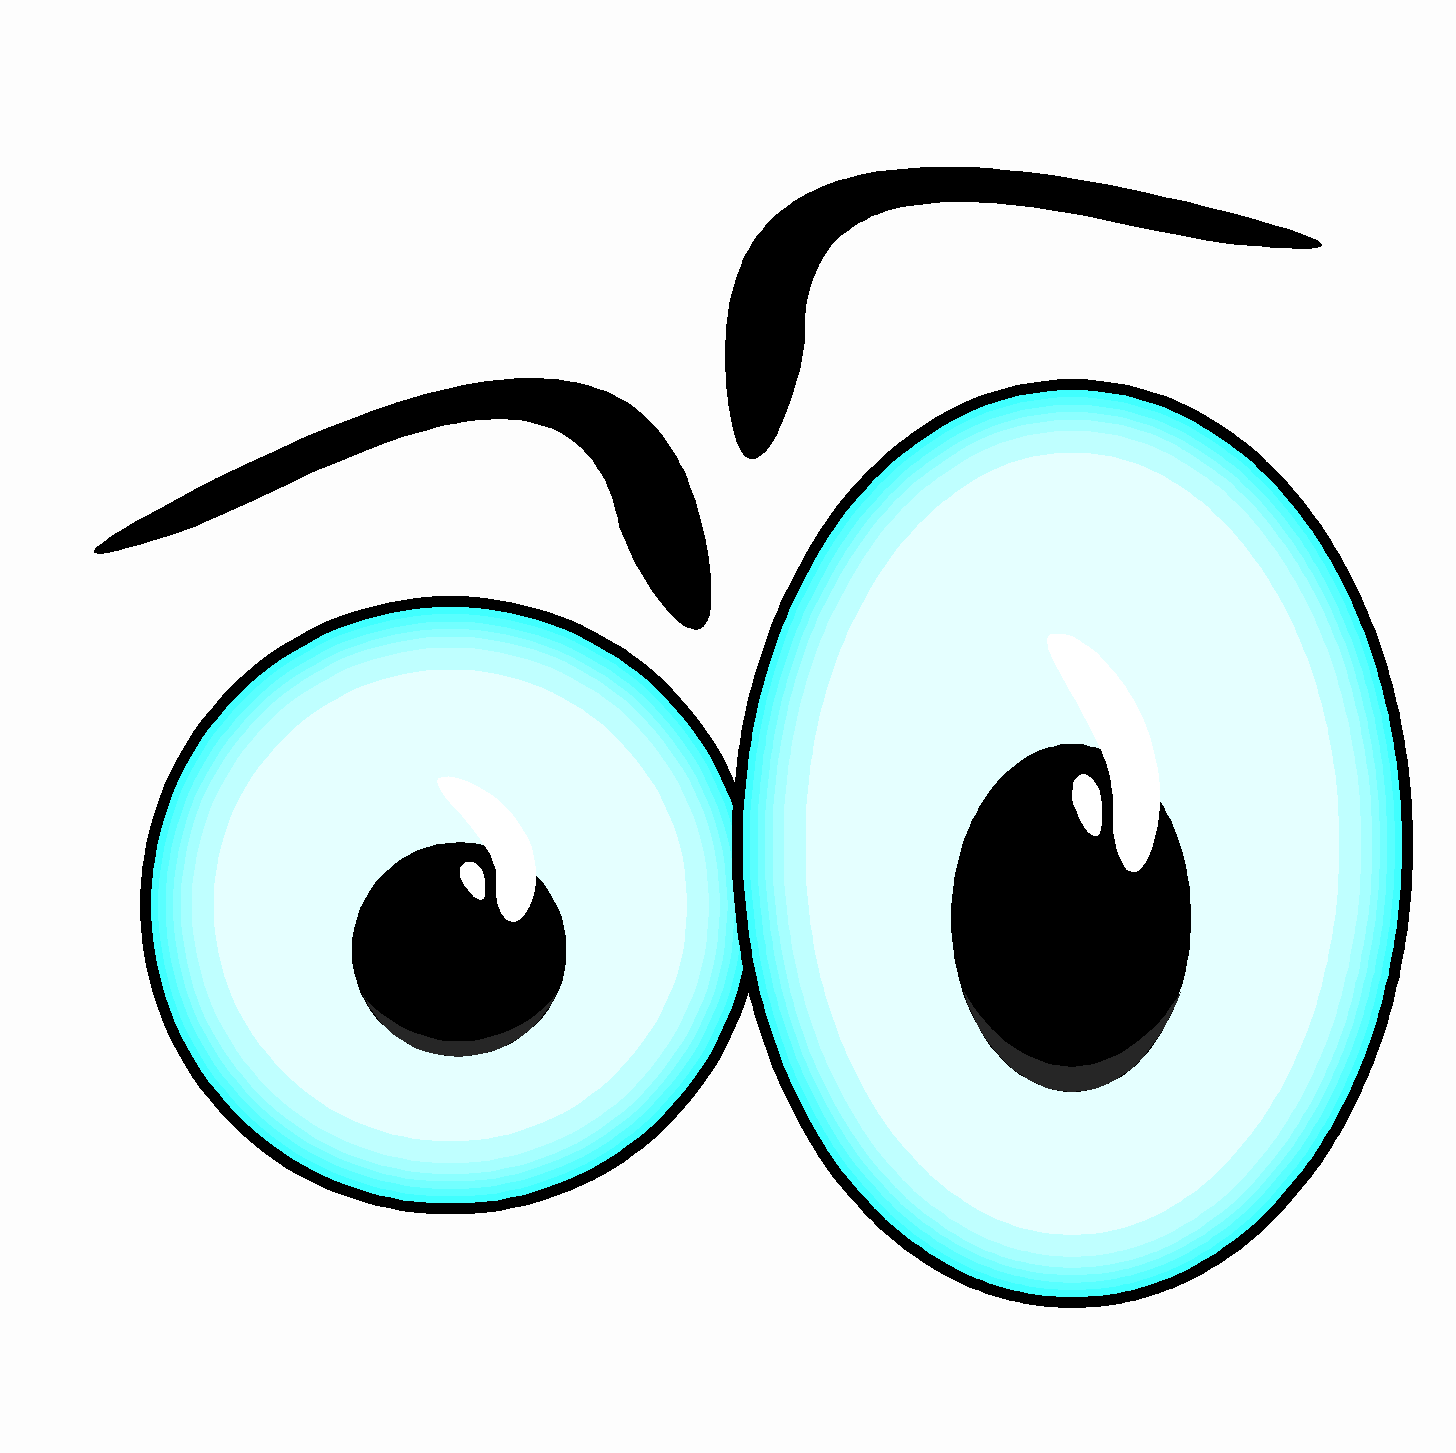 angry eyes clip art